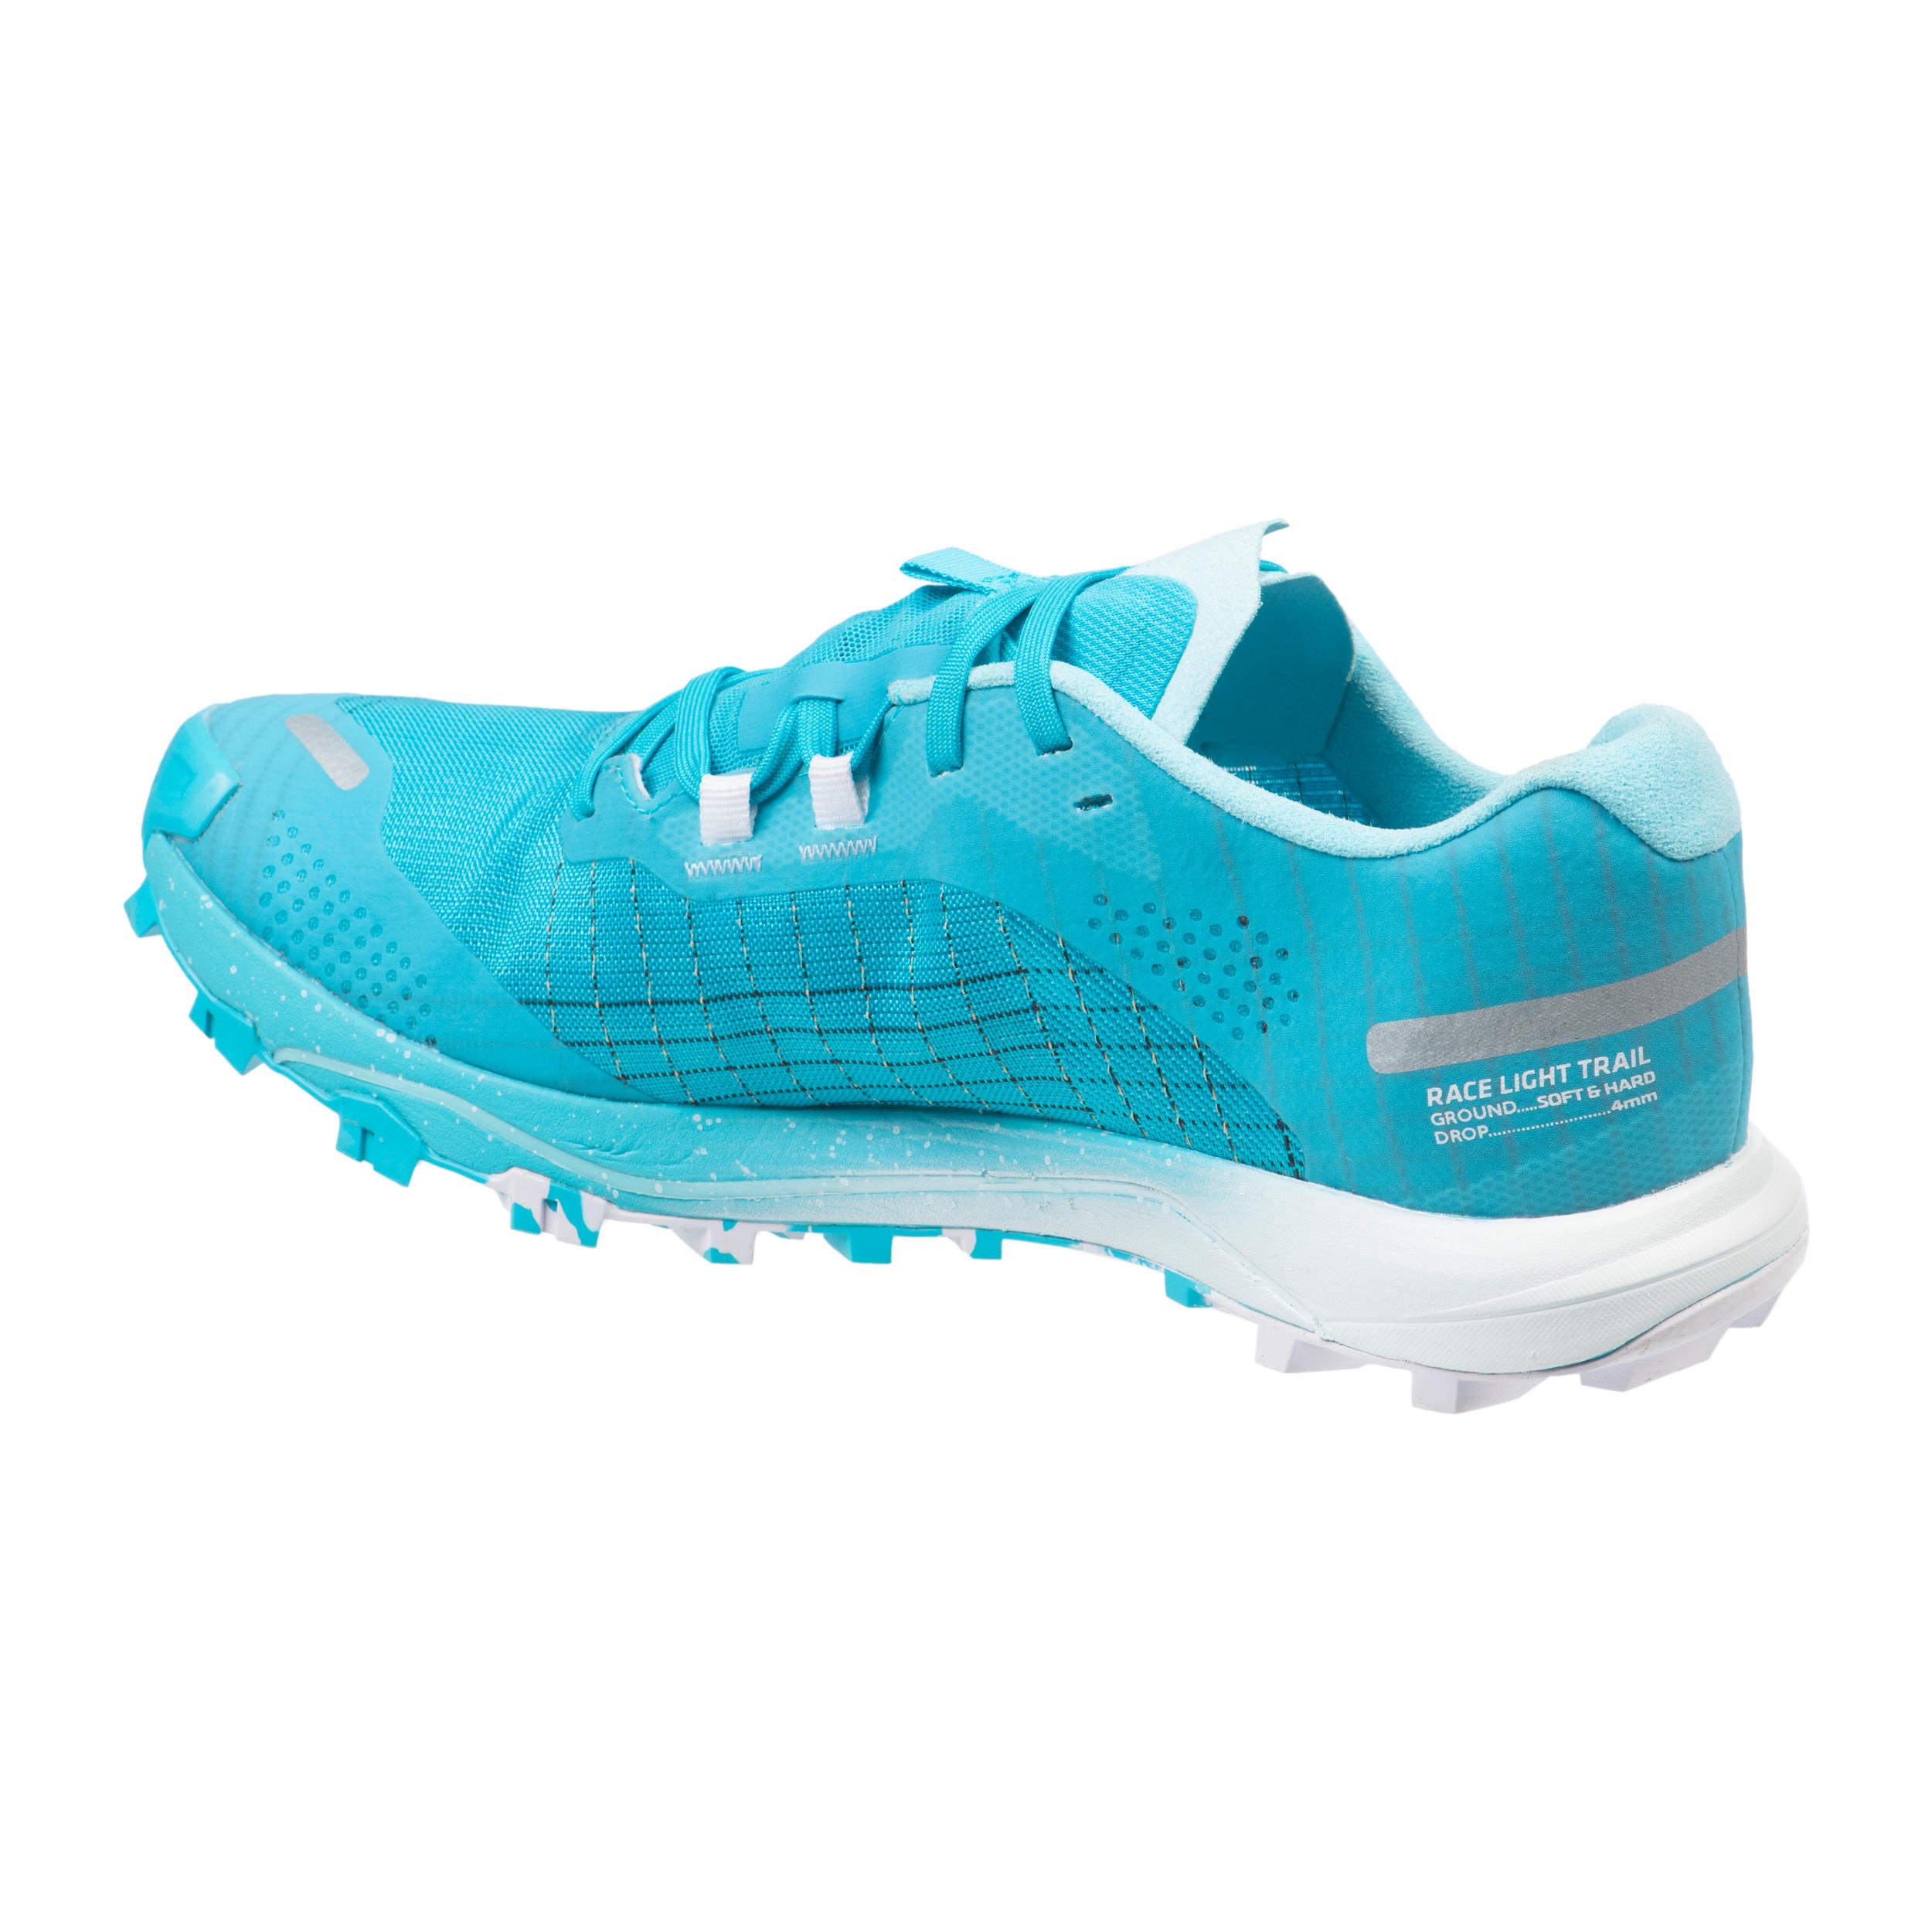 Race Light Women's Trail Running Shoes - sky blue and white 6/13